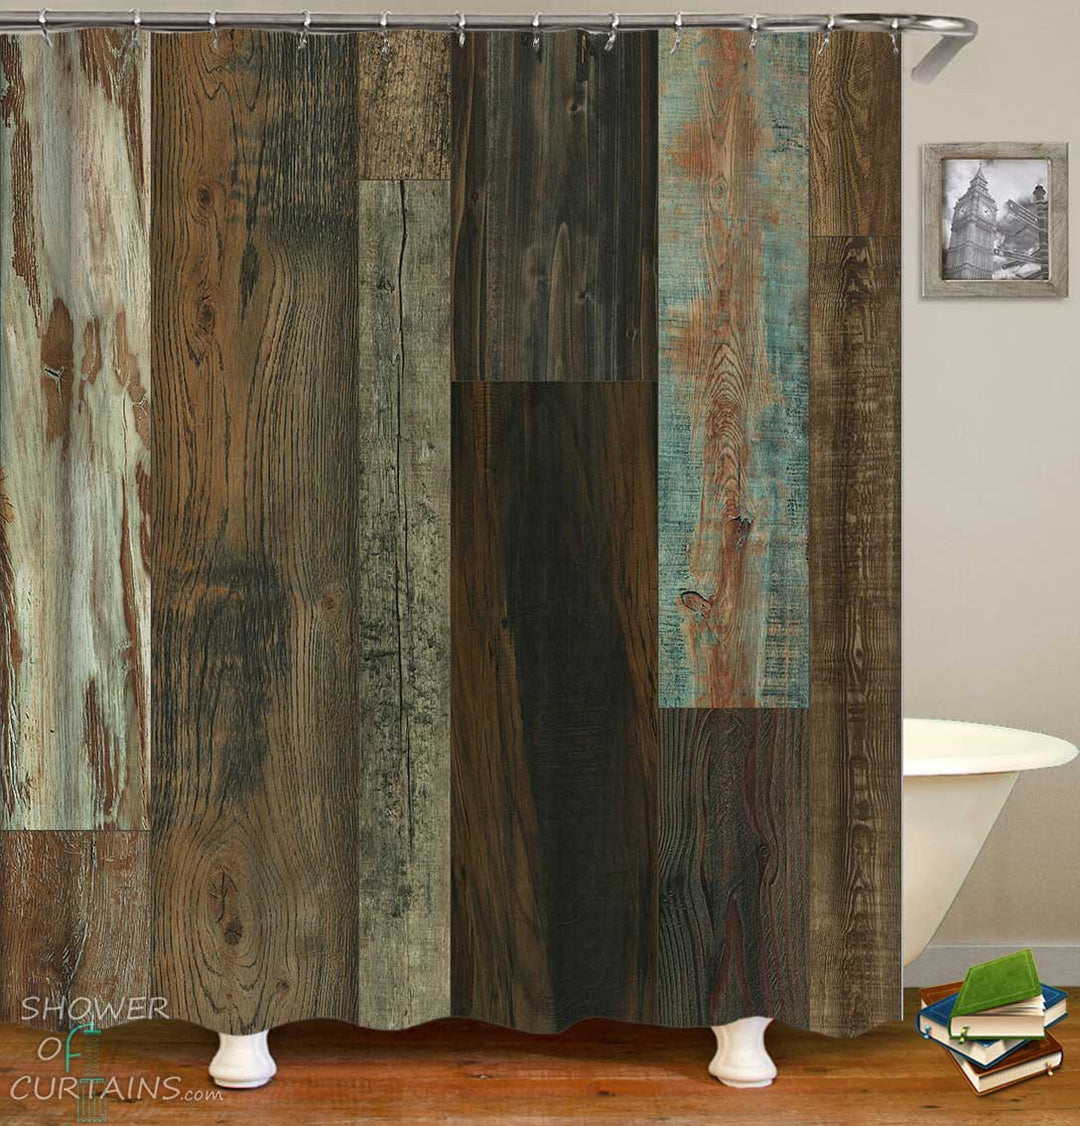 Shower Curtains with Worn Turquoise Wood